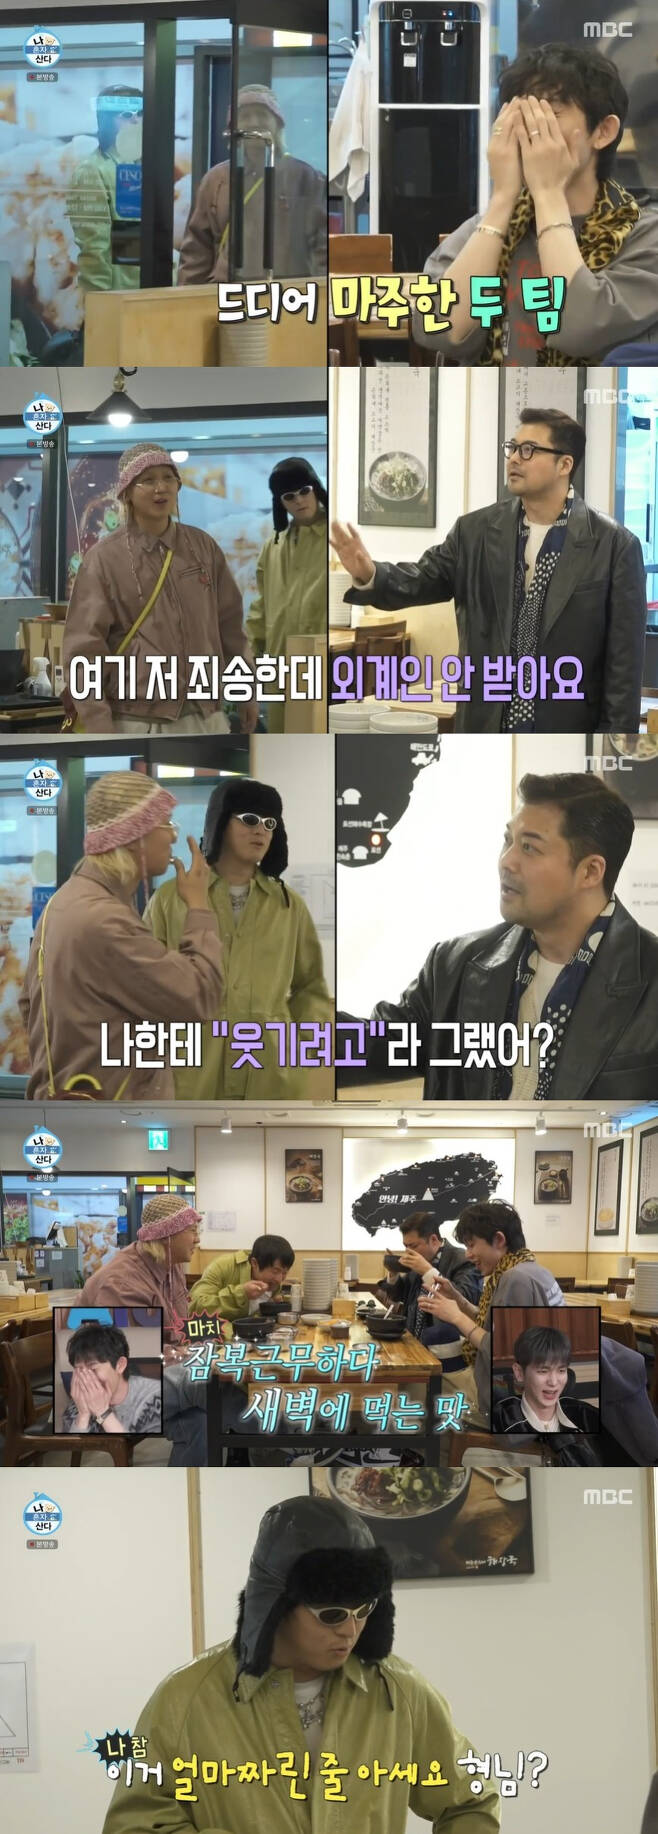 MBC entertainment program I Live Alone broadcasted on the afternoon of the 14th showed Jun Hyun-moo, Code Kunst, Kian84 and Song Min-ho playing Fashion.On this day, Jun Hyun-moo and Kod Kunst scoffed at Kian84s style, with Kod Kunst saying, Whats that, while Song Min-ho and Kian84 told Jun Hyun-moos Fashion, Whats Leon?That guy, he laughed.Jun Hyun-moo pointed out Kian84s style in an interview with the production team. Jun Hyun-moo said, Hes trying to be funny. Minho did not mean much. I thought it was just an alien walking.Something Kian84 was covered in (Song Min-ho)s clothes. He was eaten by his clothes, Kod Kunst said.Song Min-ho also laughed at Fashion in an interview with the production team, saying, As soon as I saw it, I thought I was joking. I was dressed up in a leather jacket. I thought I had a concept that was funny.Kian84 also shrugged, saying, Two-thirds were jackets. I was too wobbly.The second judge, Joo Woo-jae, chose Kian84, and Jun Hyun-moo said, Lets call Yi Dong-hwi once and I will admit it neatly.Yi Dong-hwi said to the two people walking, Its a wrap, and said, Im your brother.In an interview with the production team, Jun Hyun-moo said, I didnt want to miss out on Yi Dong-hwi. If Yi Dong-hwi only acknowledges me, I can win the spirit. Yi Dong-hwi is very nice.Zico said, I think Kian84 has won. Hyun-moo feels a little Hong Kong.This resulted in Jun Hyun-moo losing the match to Fashion by a score of three to one.The winner, Song Min-ho, said, Its my first model. Its a great mannequin. It feels so good to end up winning. Kian84 said, I actually felt a little bad for my brother. I think I hurt my brother by asking him to do something that he shouldnt have done.I think I can wear it well if I try harder. The next time I have time, lets go shopping together. Ill pick clothes.Jun Hyun-moo wrote evil, and Code Kunst said shameful and brought Laughter.